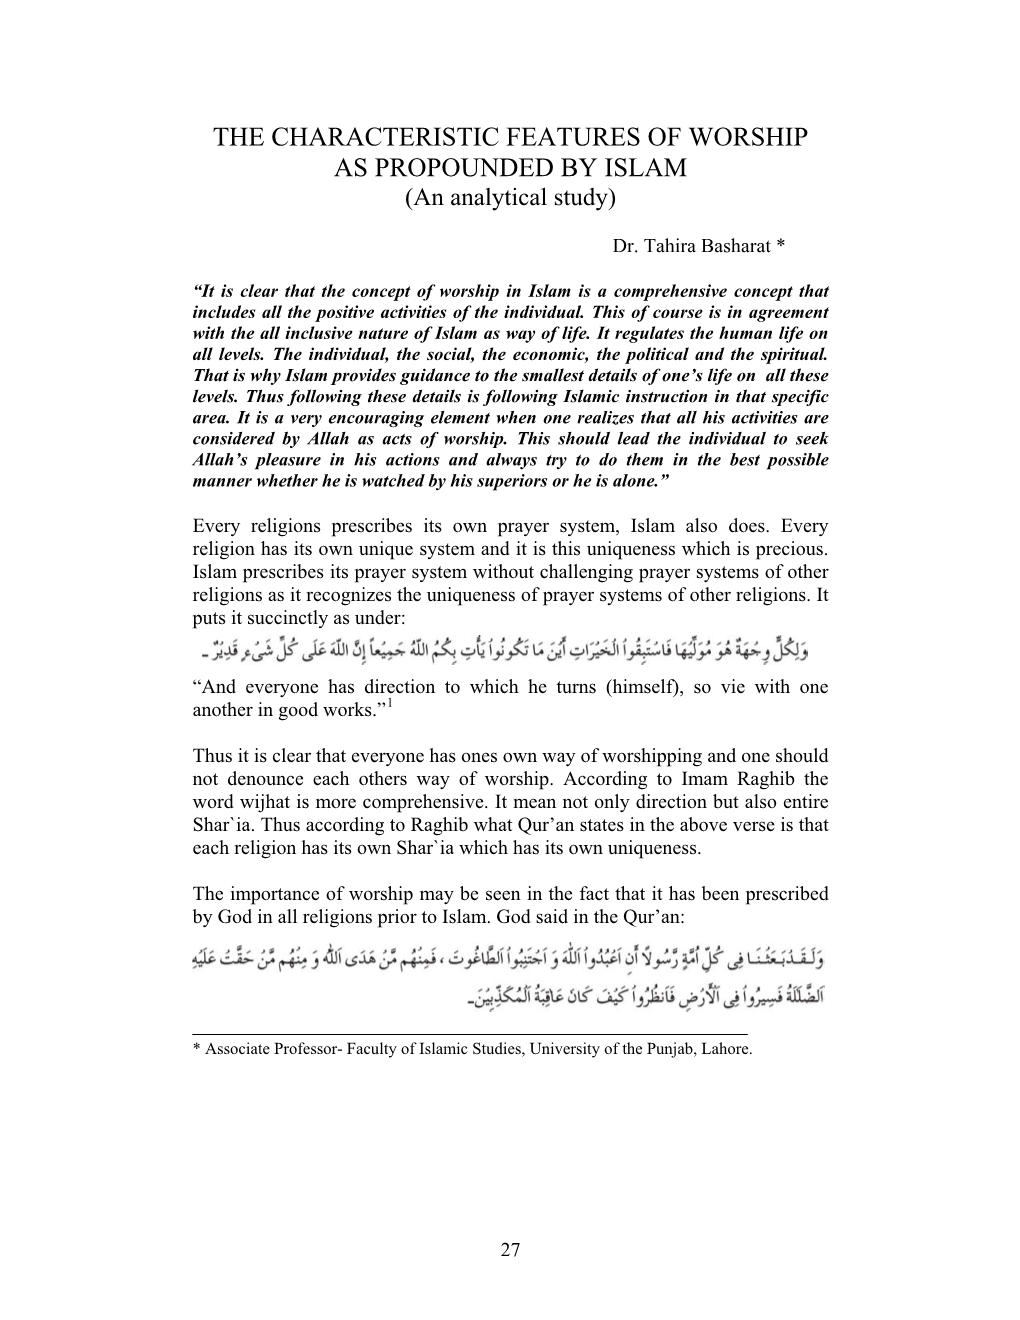 THE CHARACTERISTIC FEATURES of WORSHIP AS PROPOUNDED by ISLAM (An Analytical Study)